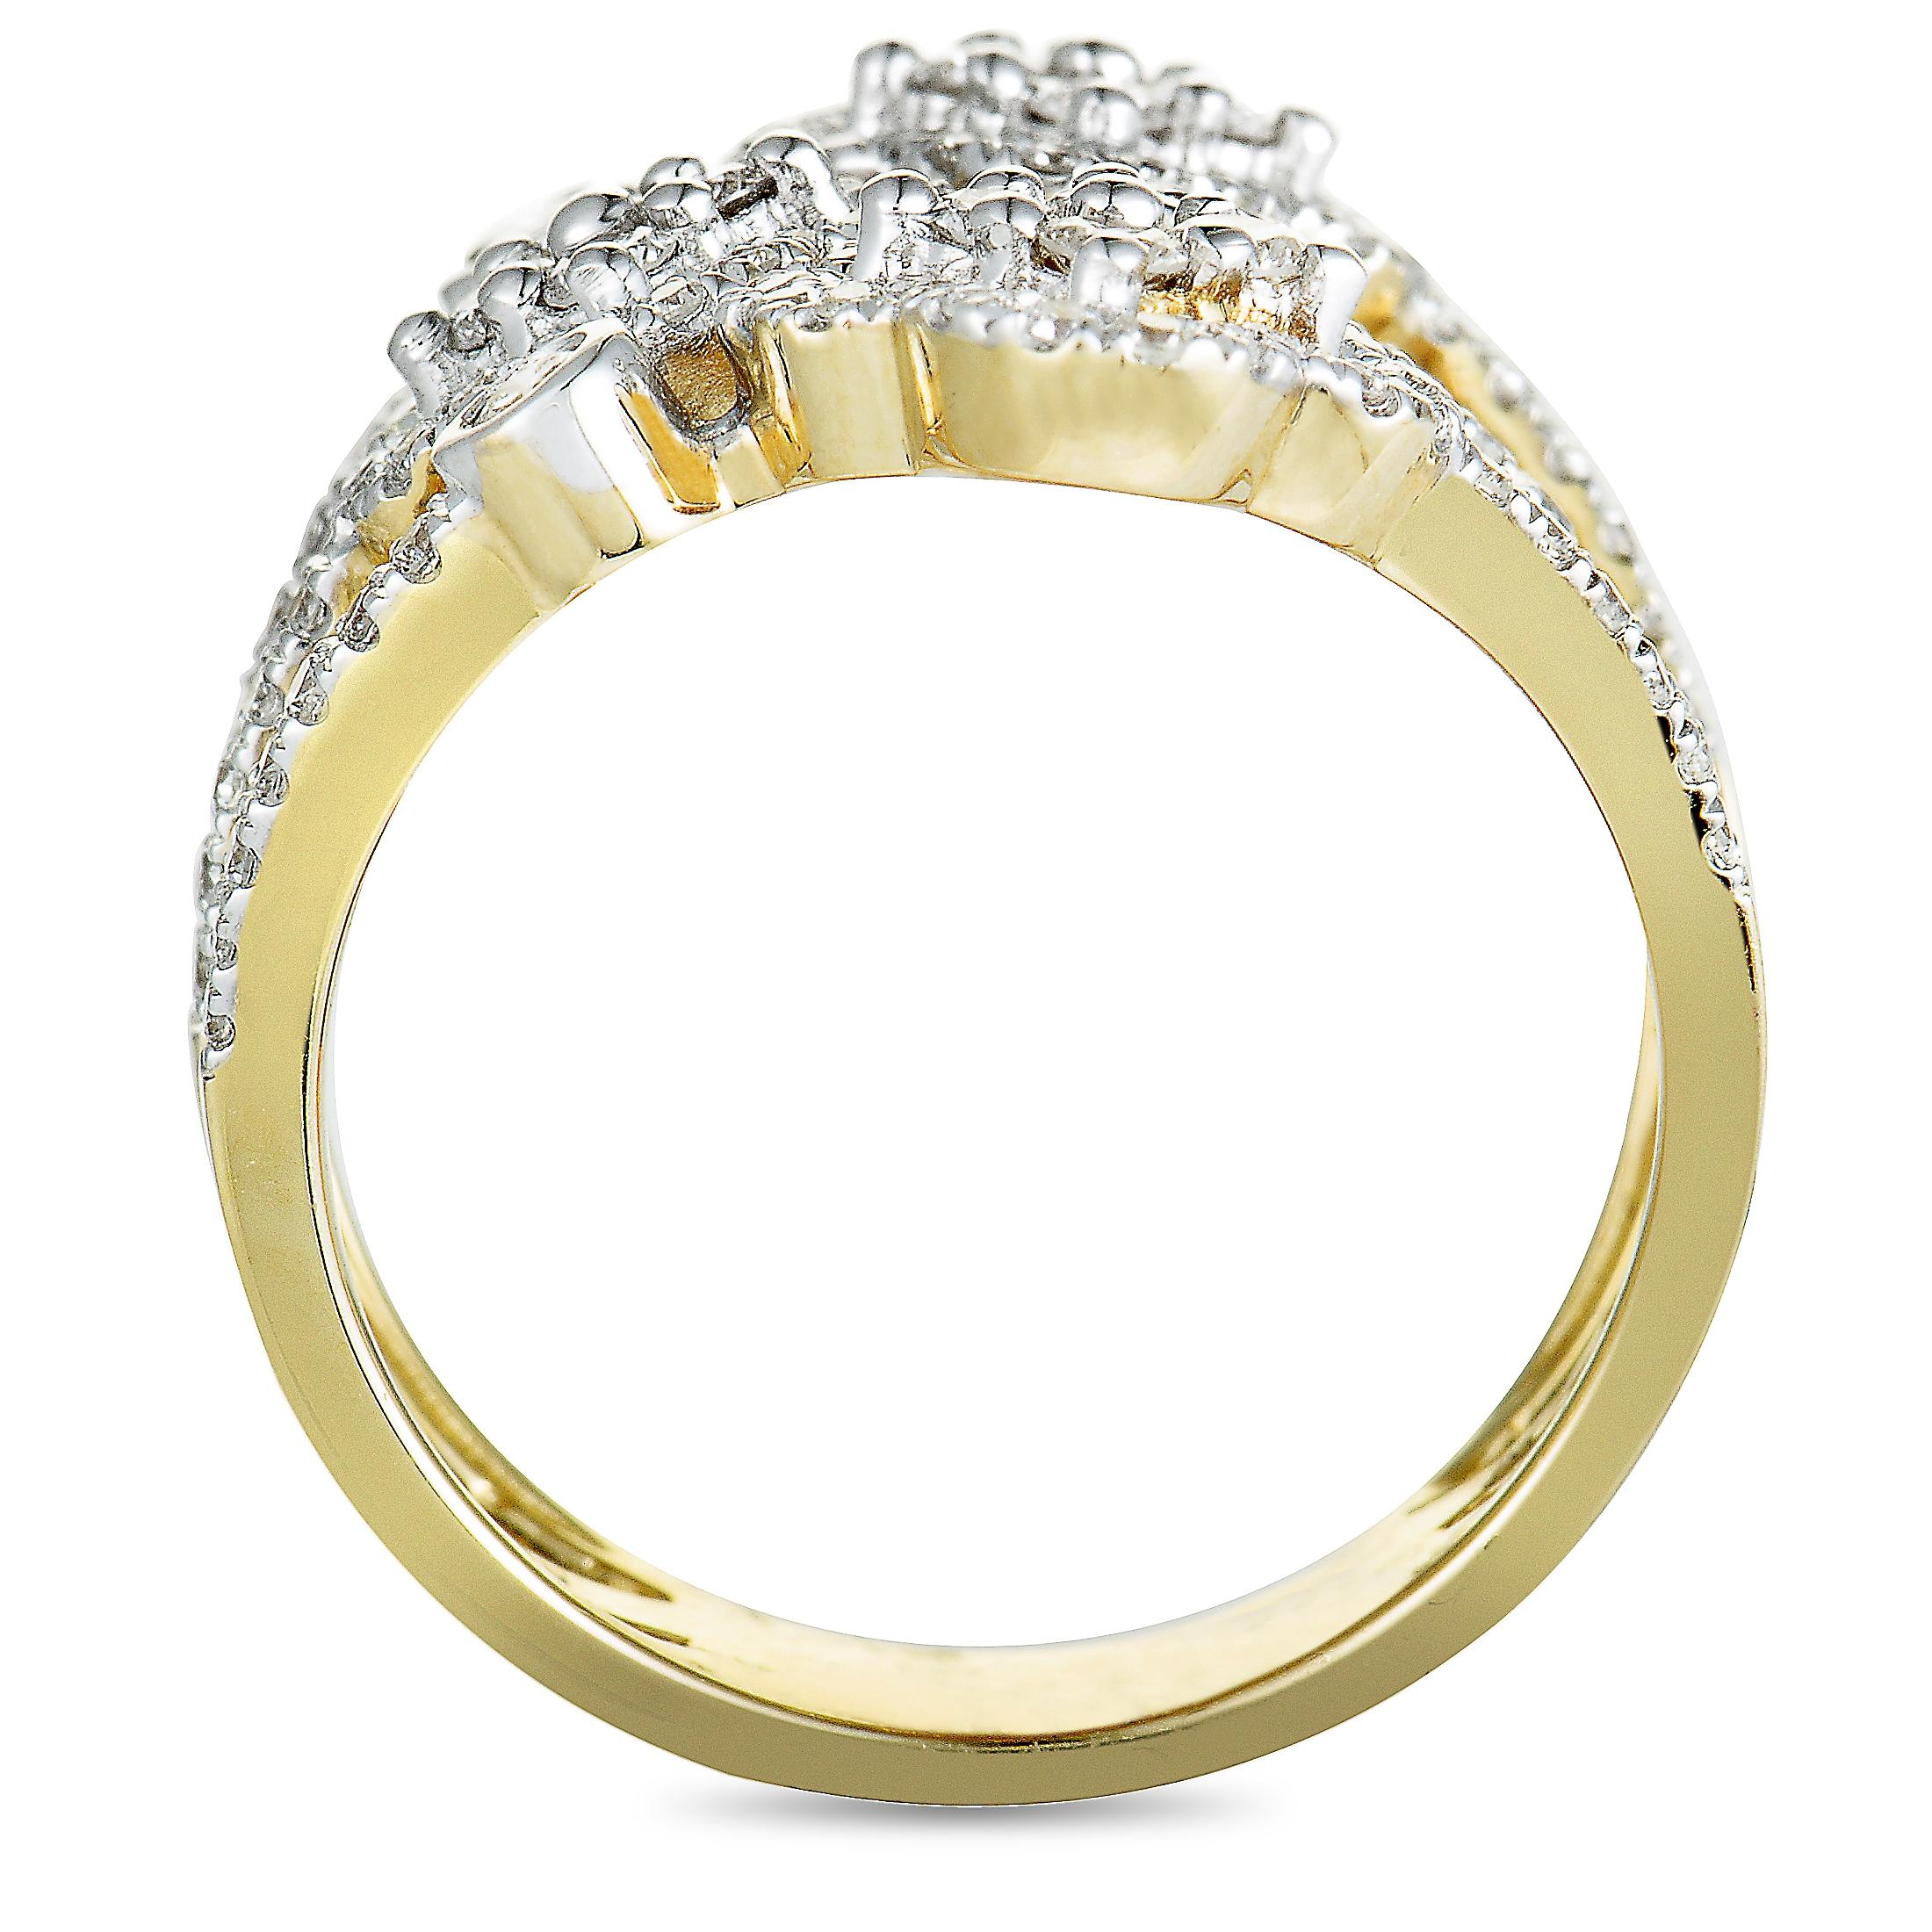 This ring is crafted from 14K yellow and white gold and set with diamonds that amount to 1.00 carat. The ring weighs 7.1 grams, boasting band thickness of 5 mm and top height of 3 mm, while top dimensions measure 20 by 23 mm.
 
 Offered in brand new